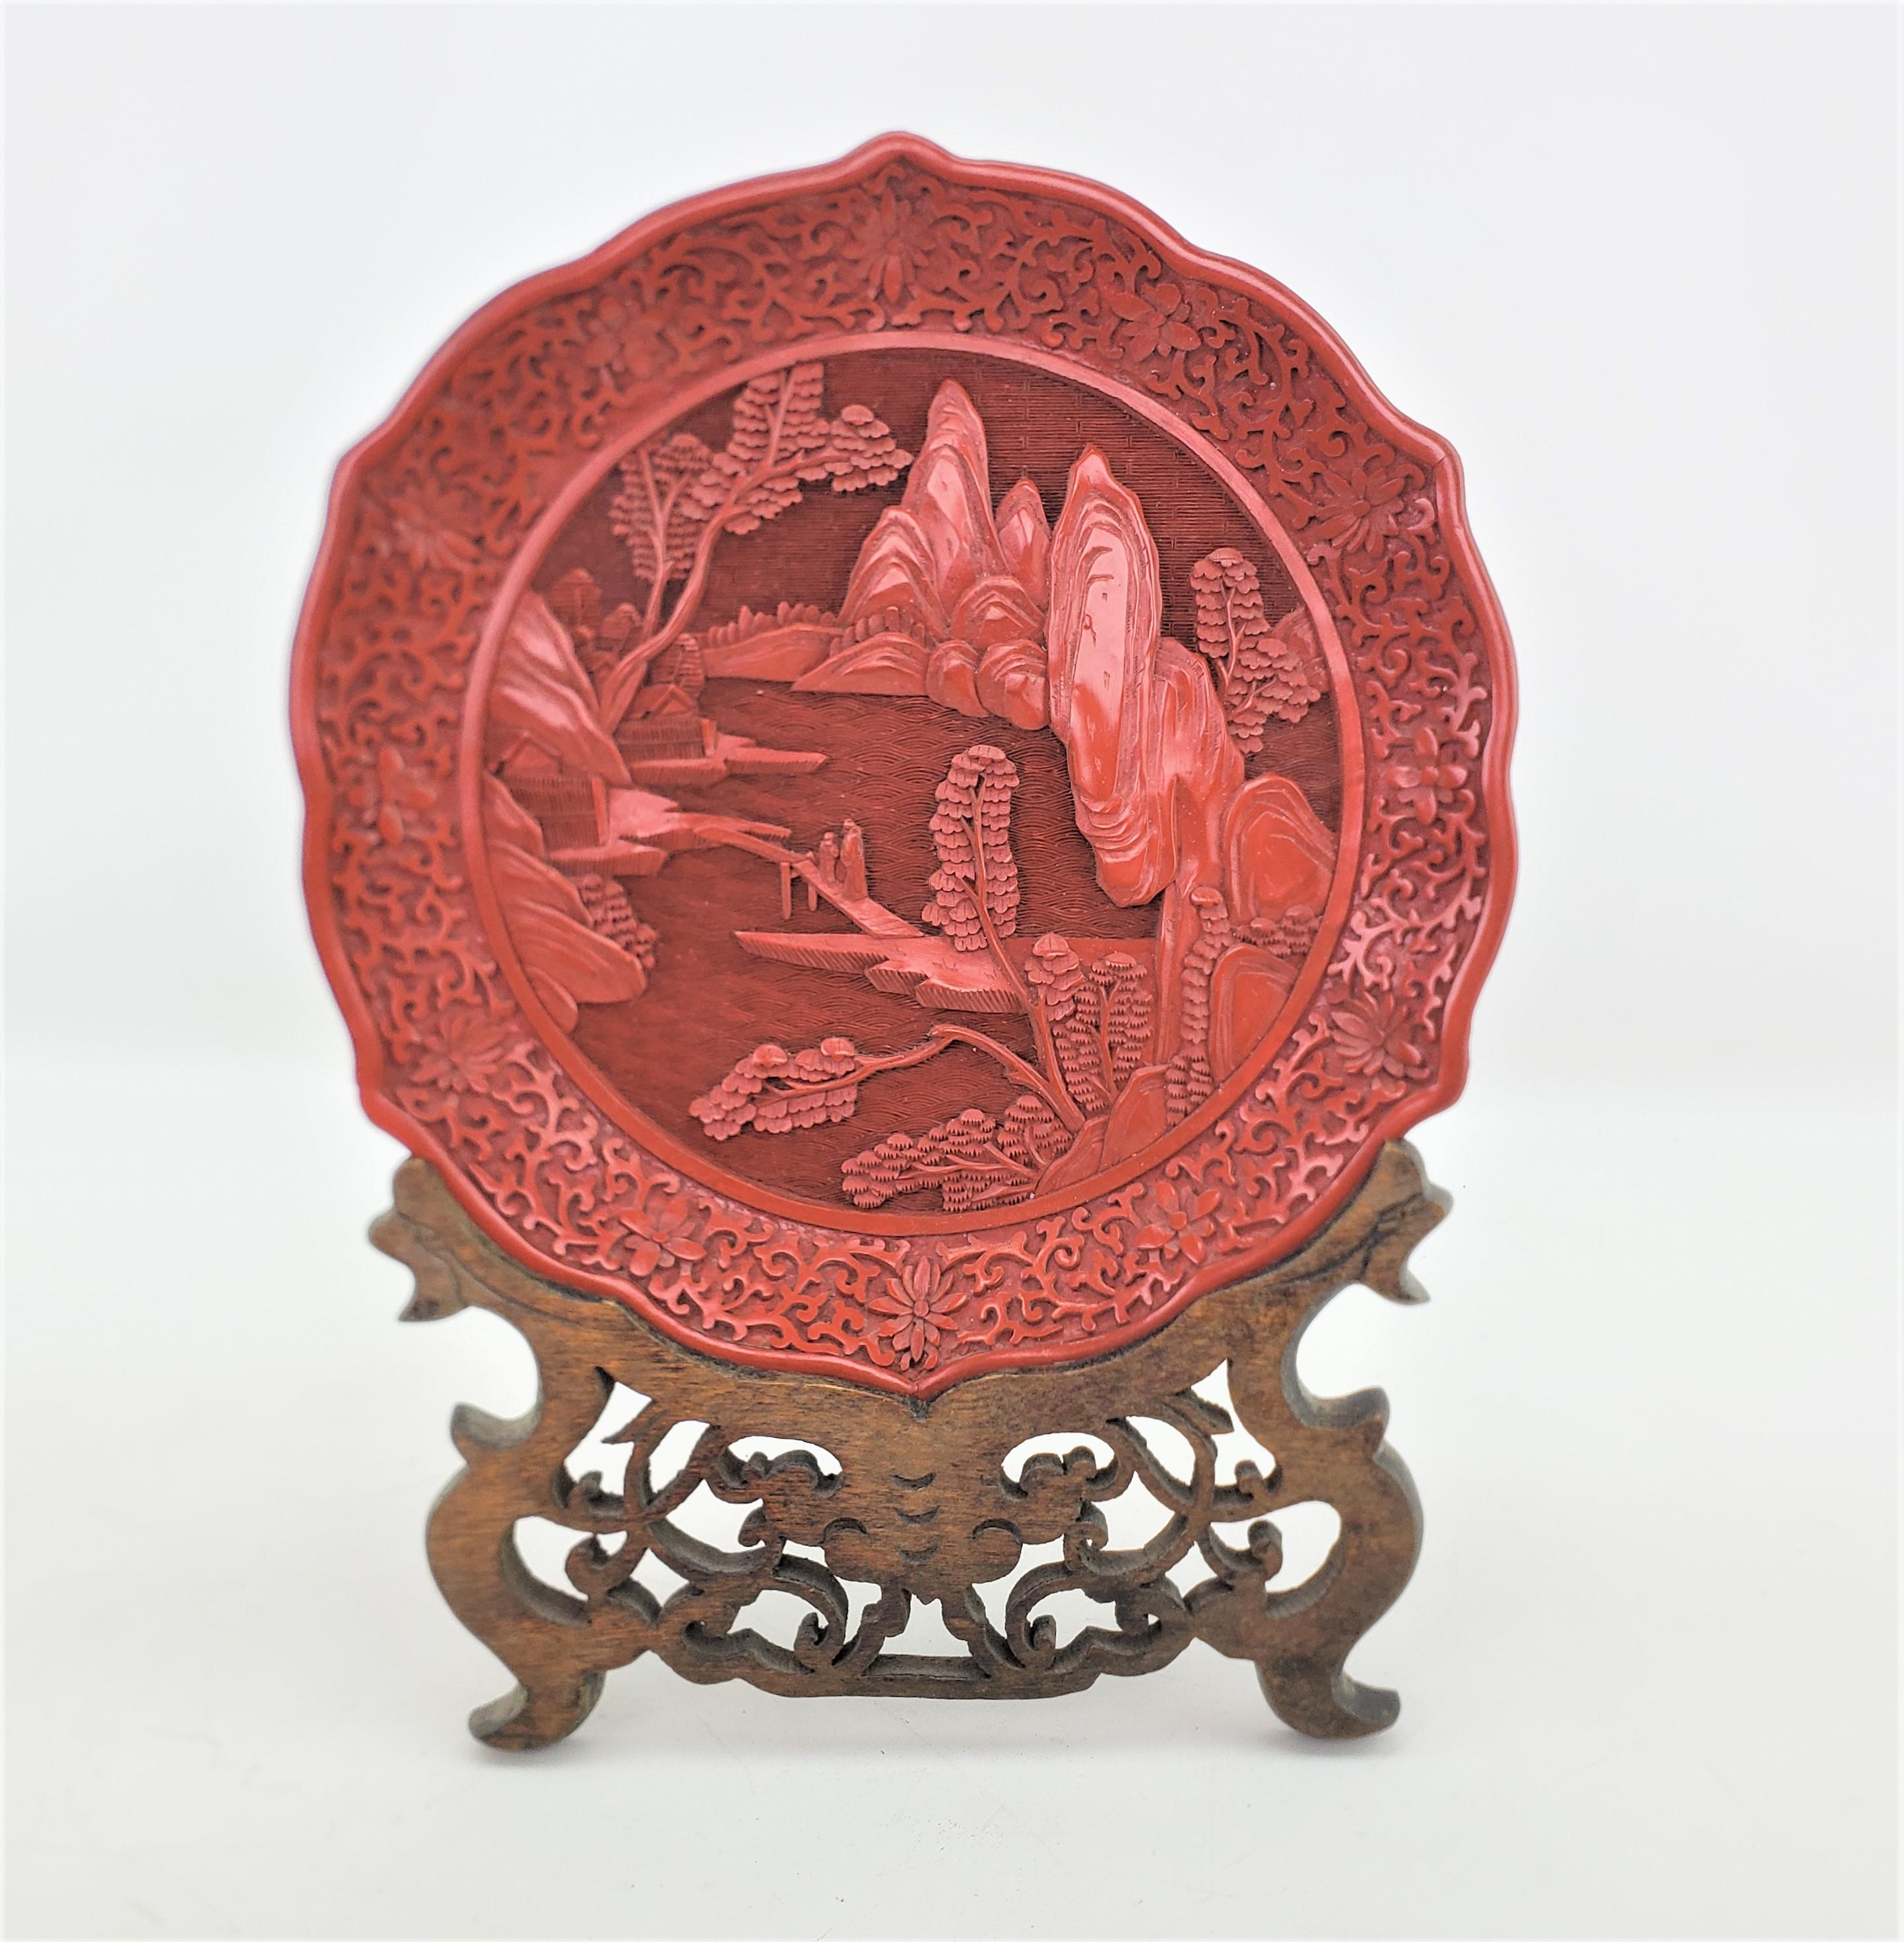 This antique carved plate is unsigned, but presumed to have originated from China and date to approximately 1920 and done in a Chinese Export style. The plate is composed of cinnabar and is ornately carved with a mountain landscape scene with